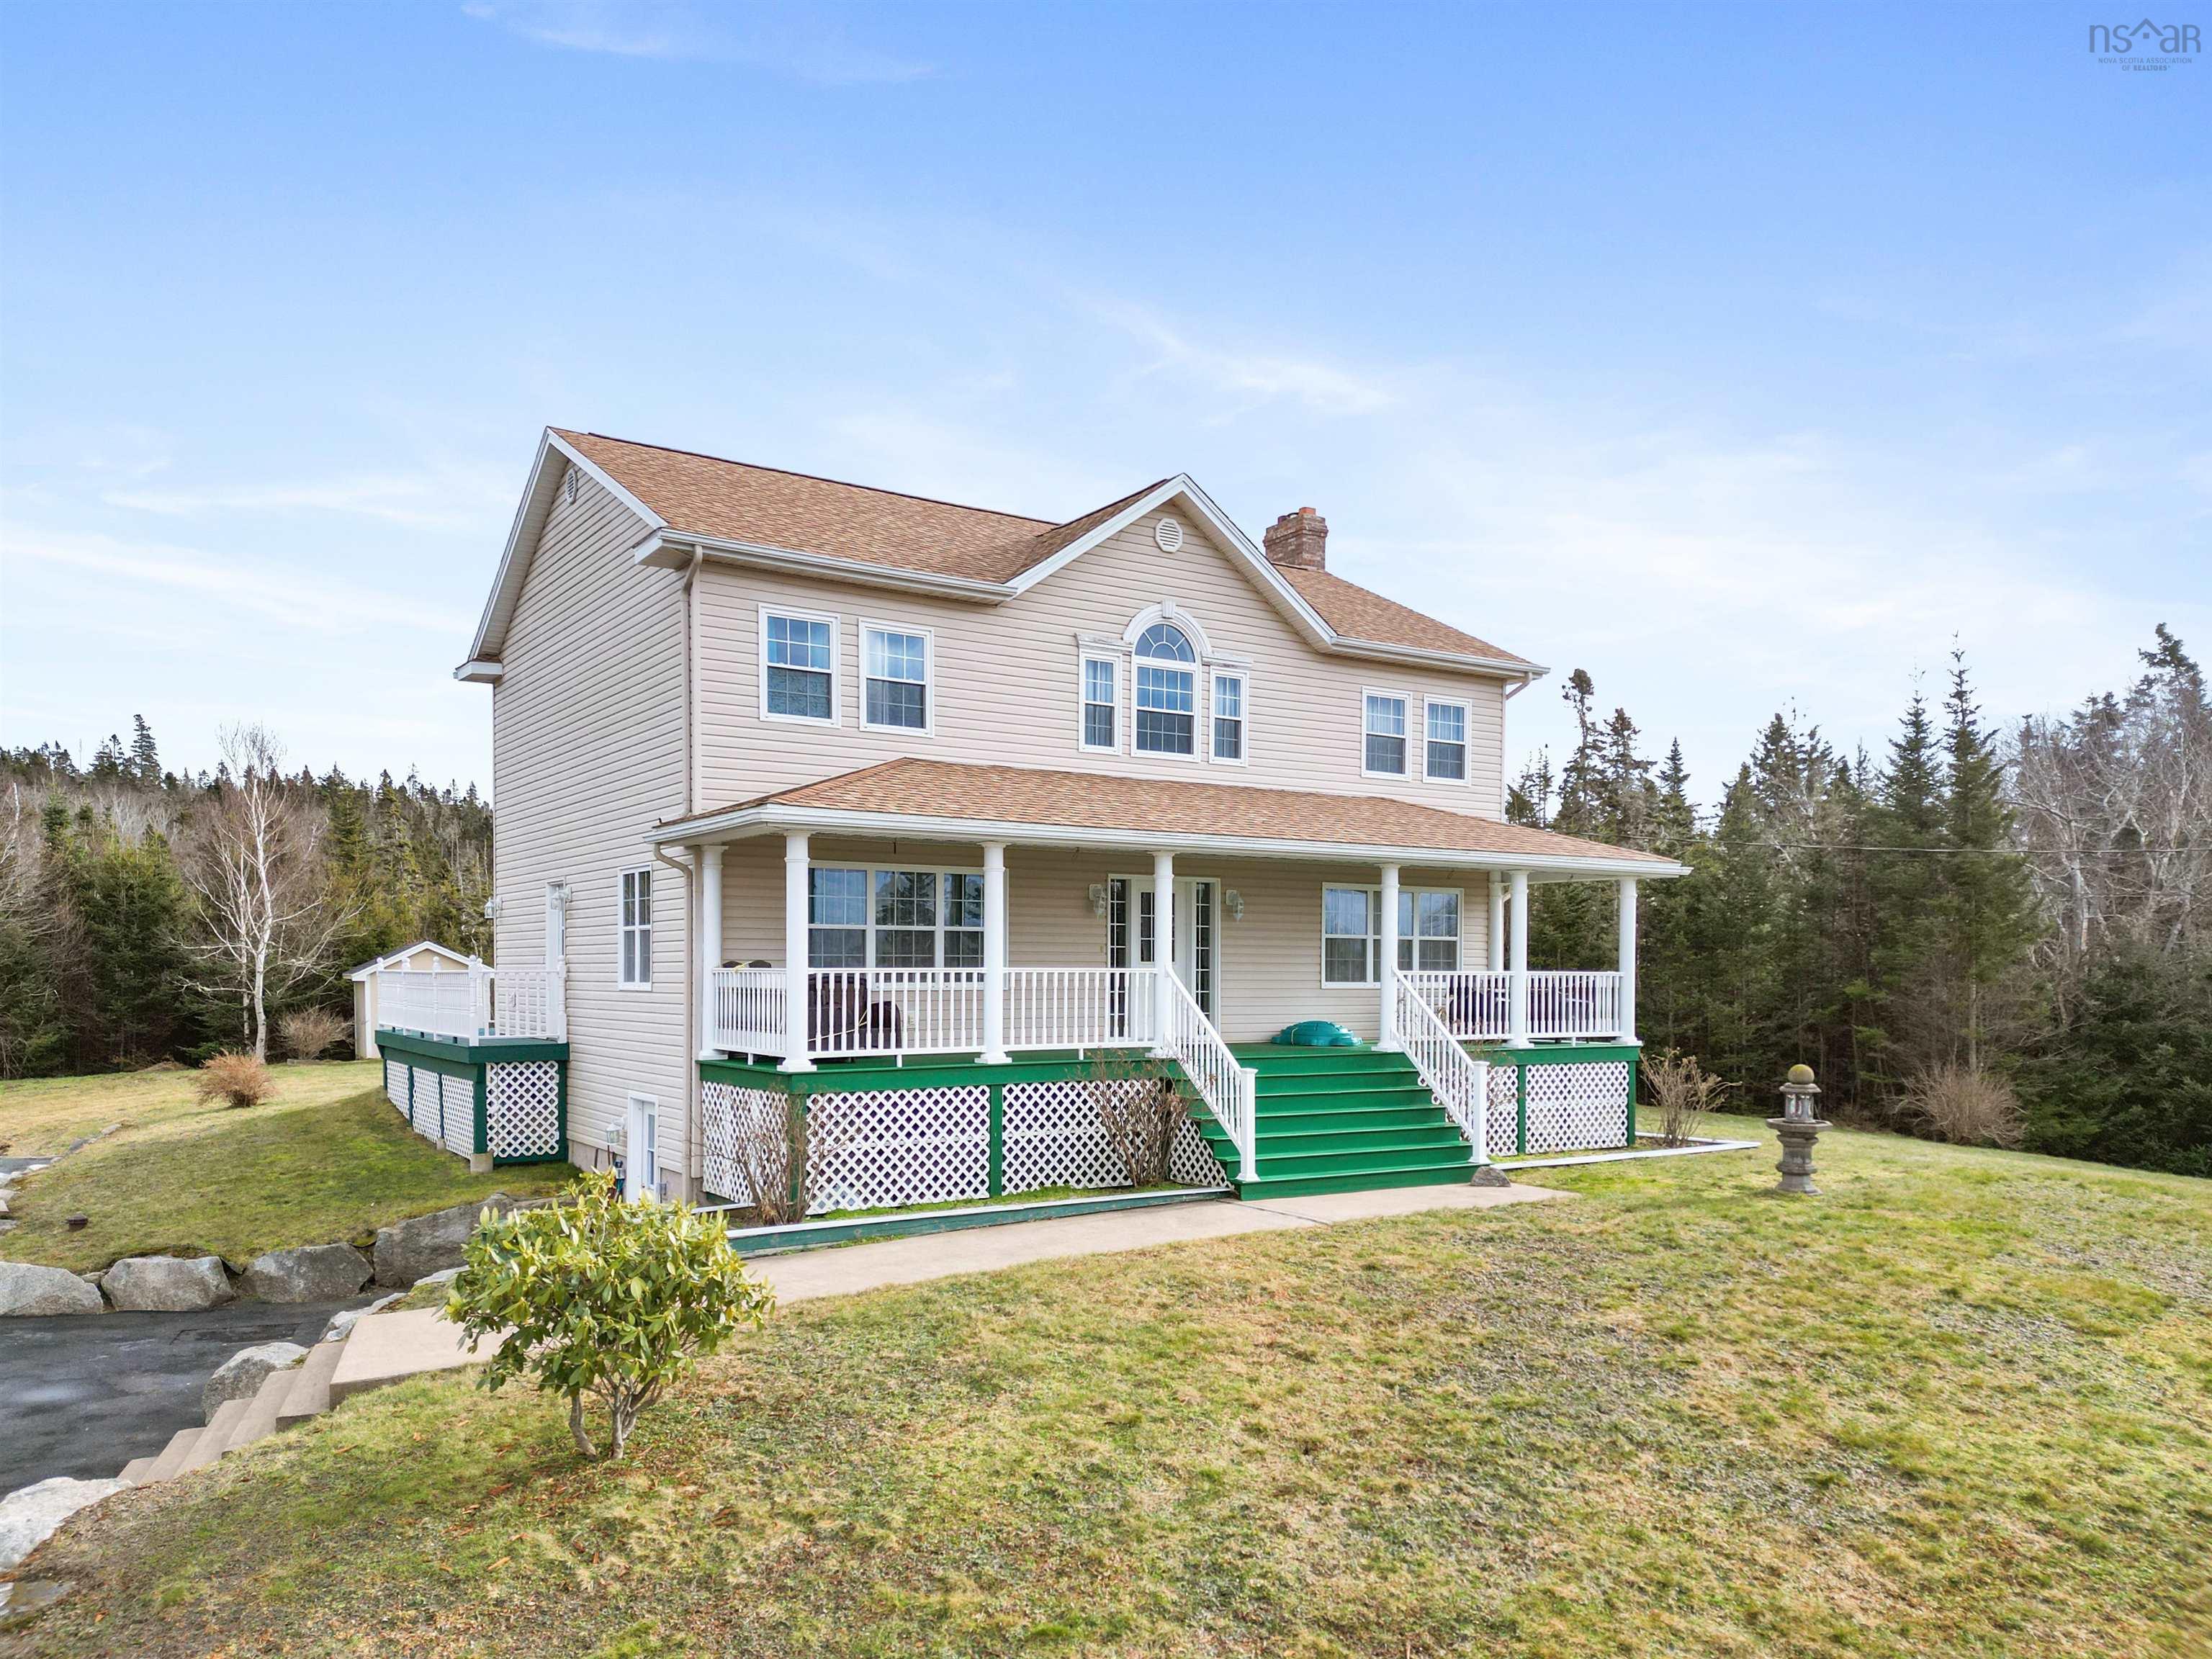 9085 Peggy's Cove Road, Indian Harbour NS B3Z 3N4 - MLS 202401538